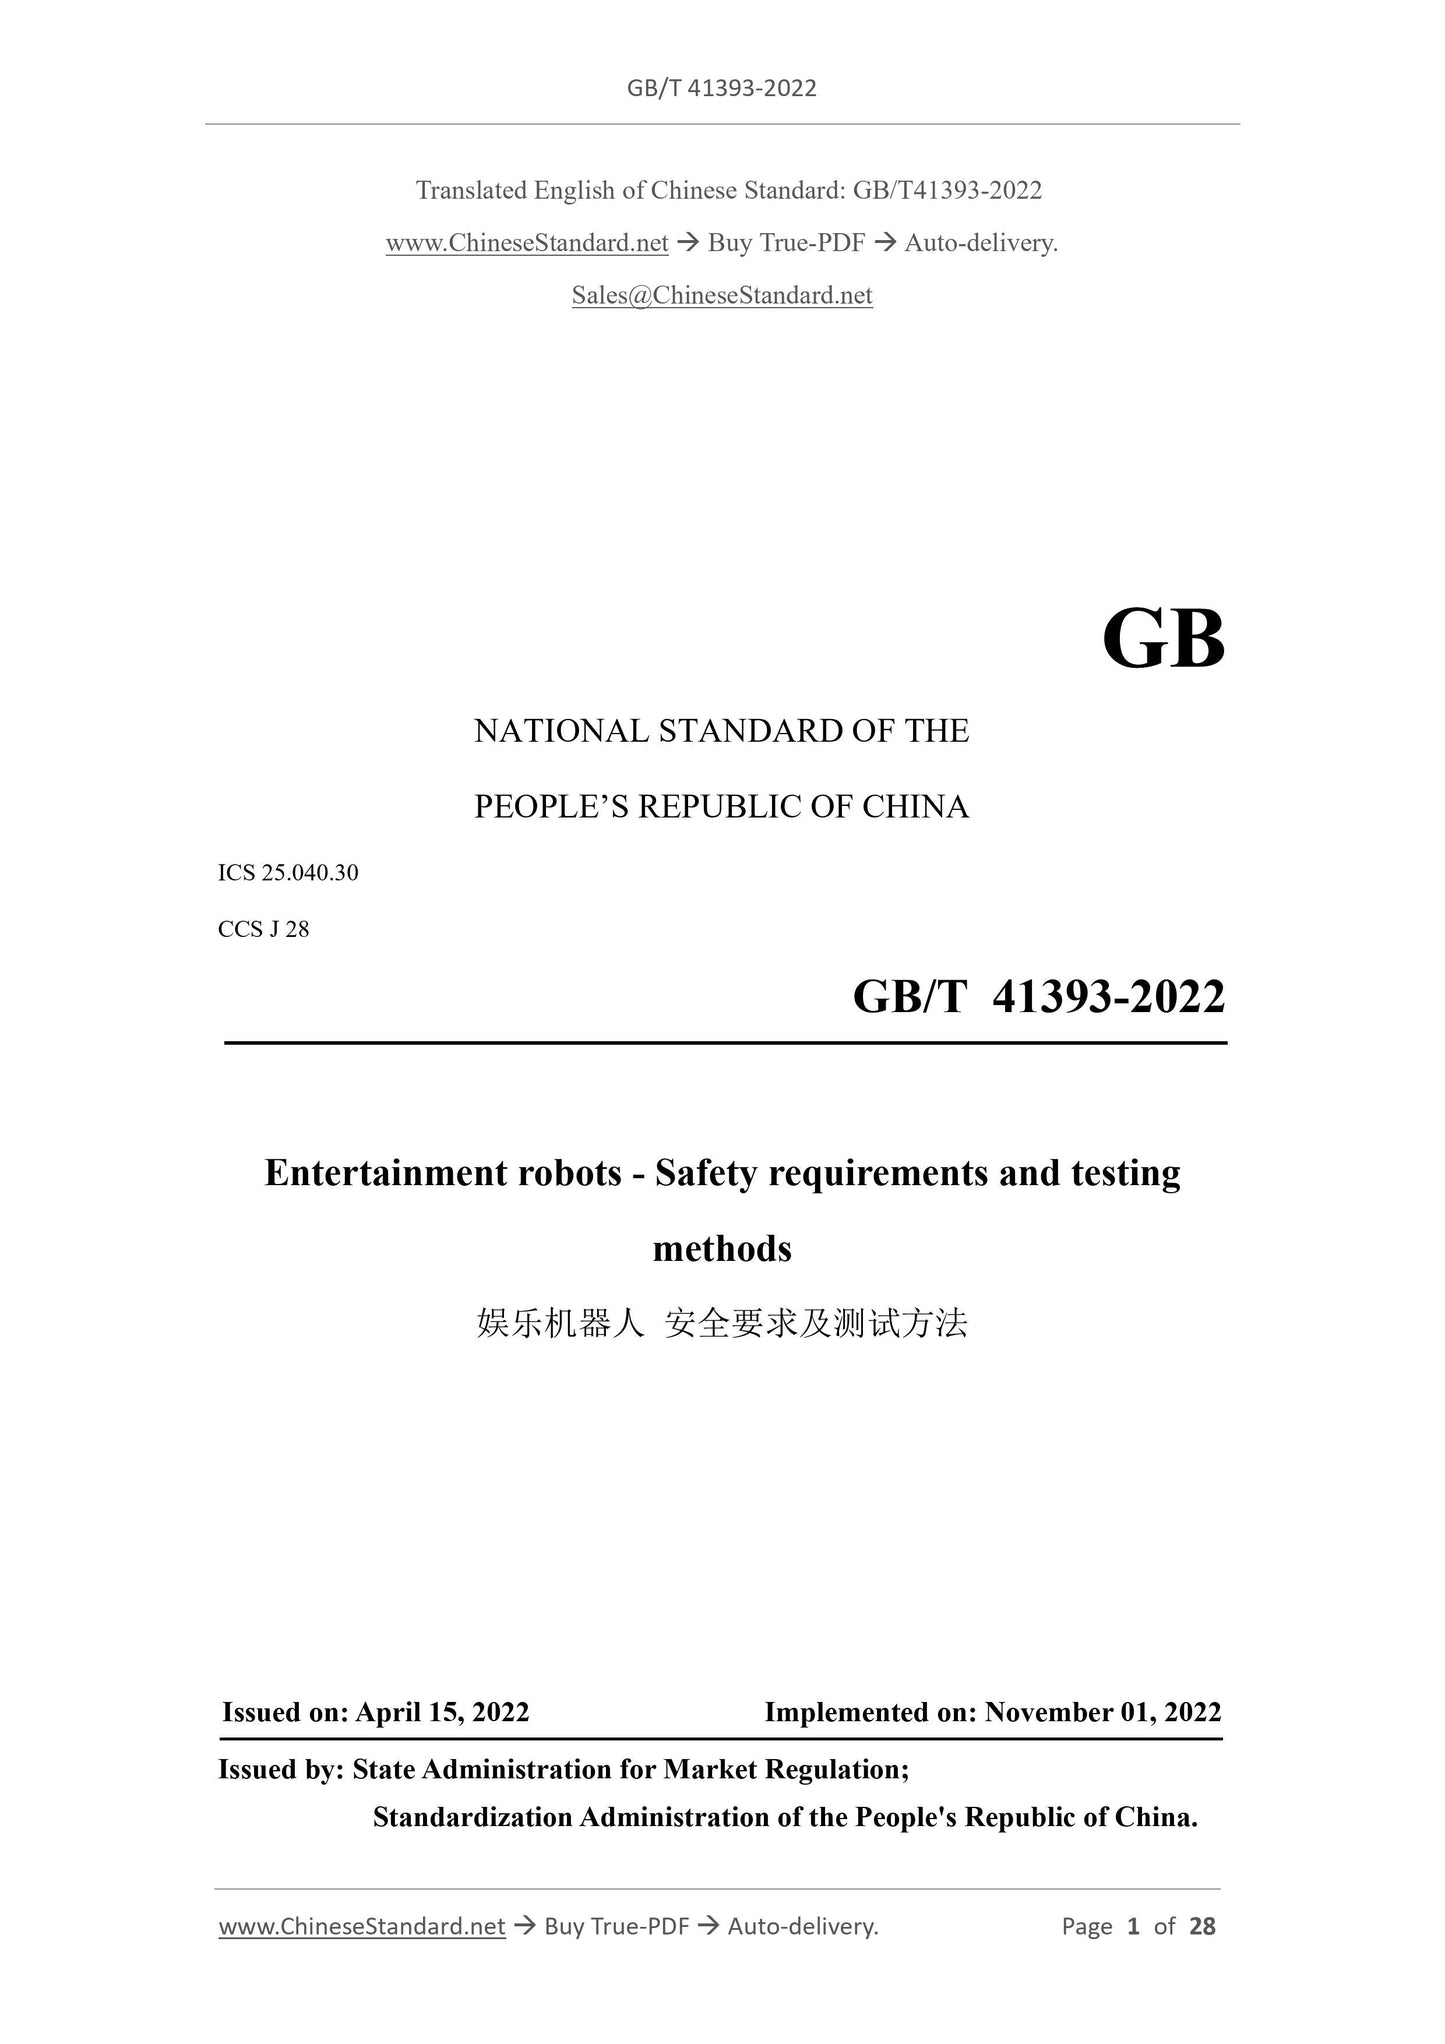 GB/T 41393-2022 Page 1